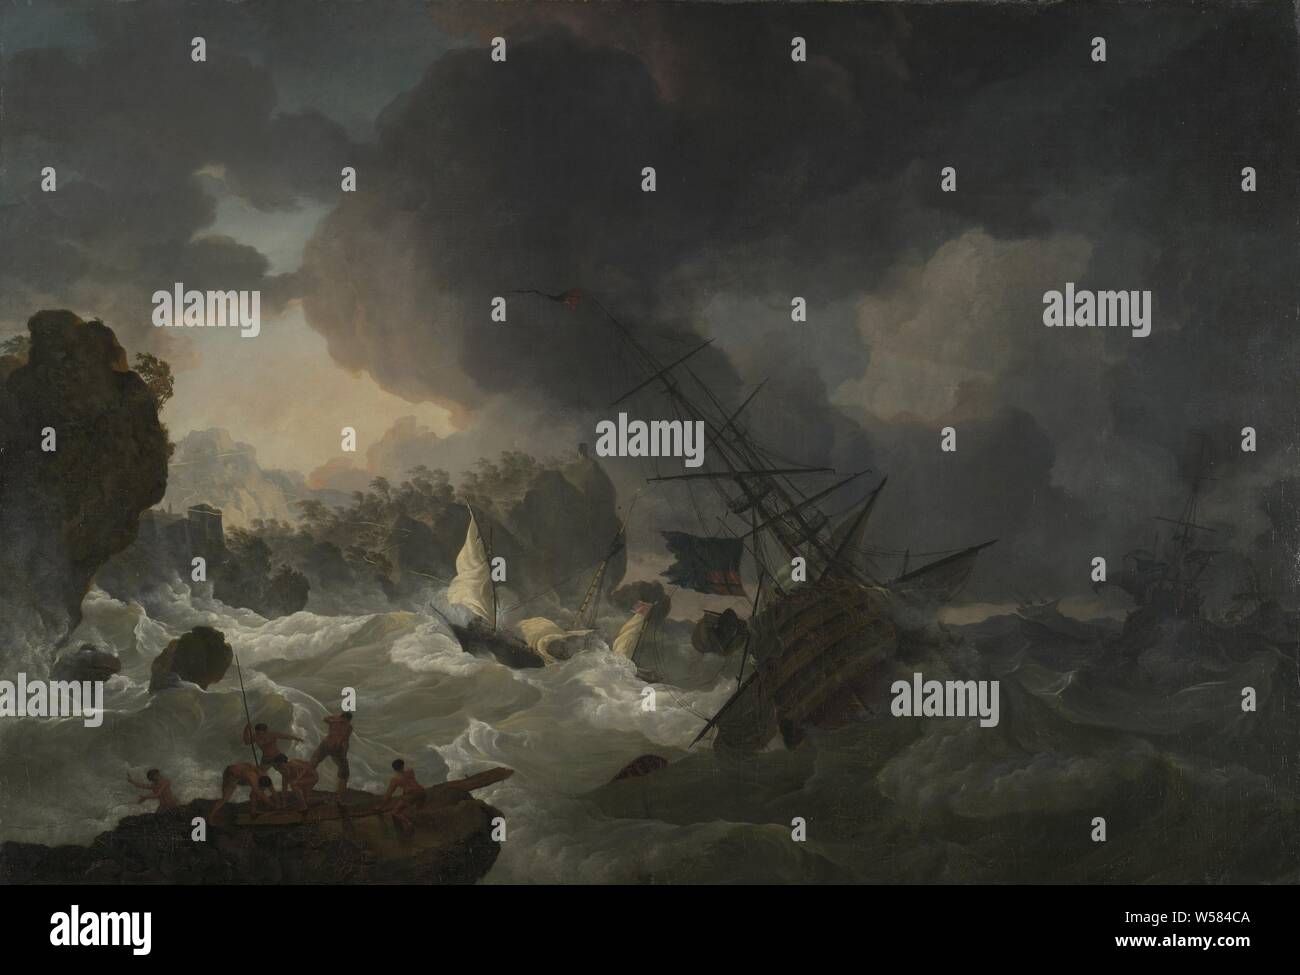 The Shipwreck, The Shipwreck. English warships and a Moroccan three-mast in distress during a storm off the North African coast, 1775. In the left foreground a group of five men on a rock near the coast. More to the back lightning bolts above a walled city on the coast., Hendrik Kobell, 1775, canvas, oil paint (paint), h 93.5 cm × w 135 cm × t 4.0 cm d 7.0 cm Stock Photo